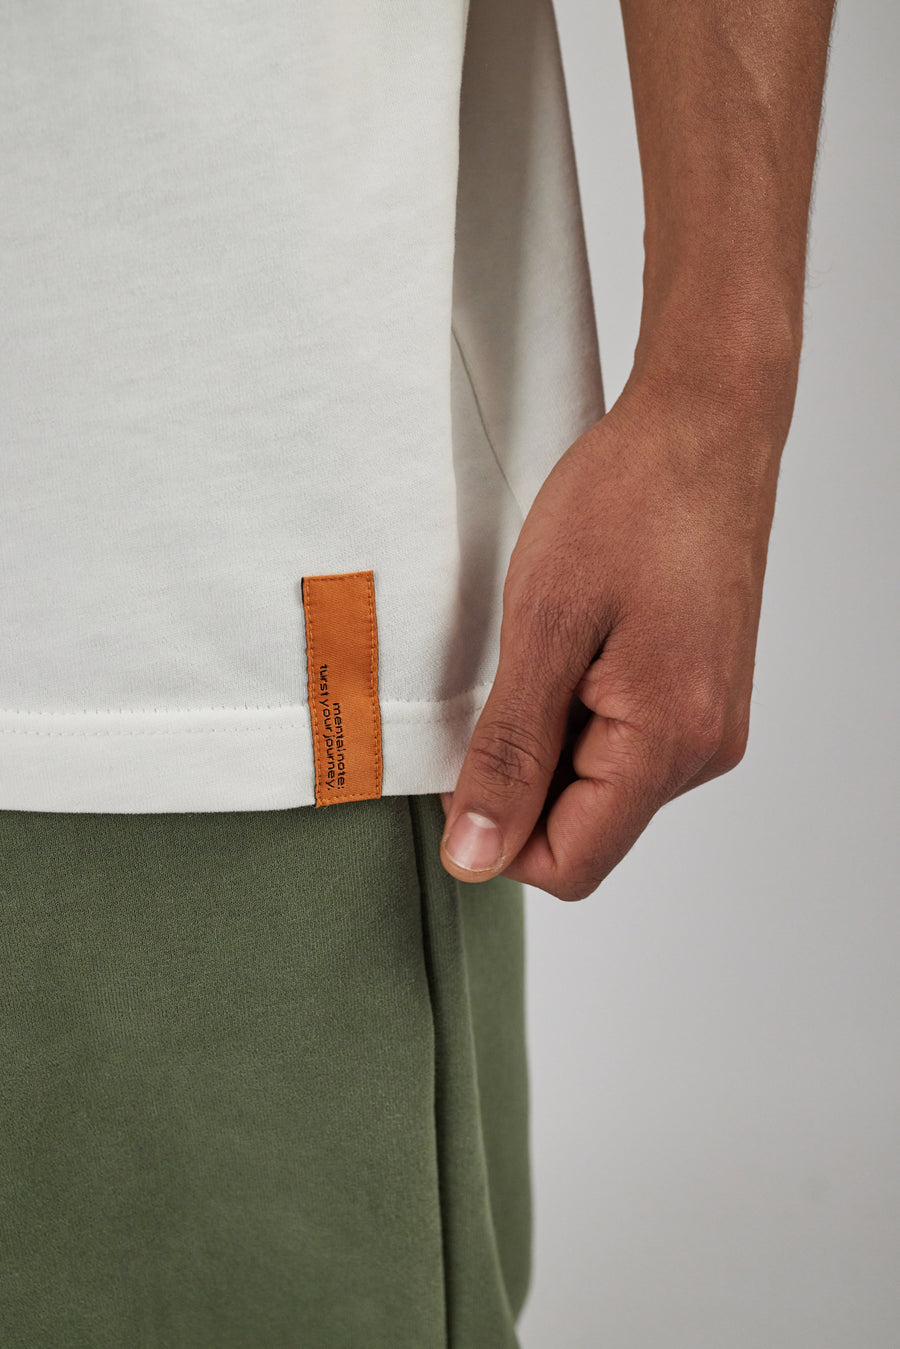 Close-up of an orange label stitched on the bottom of a t-shirt